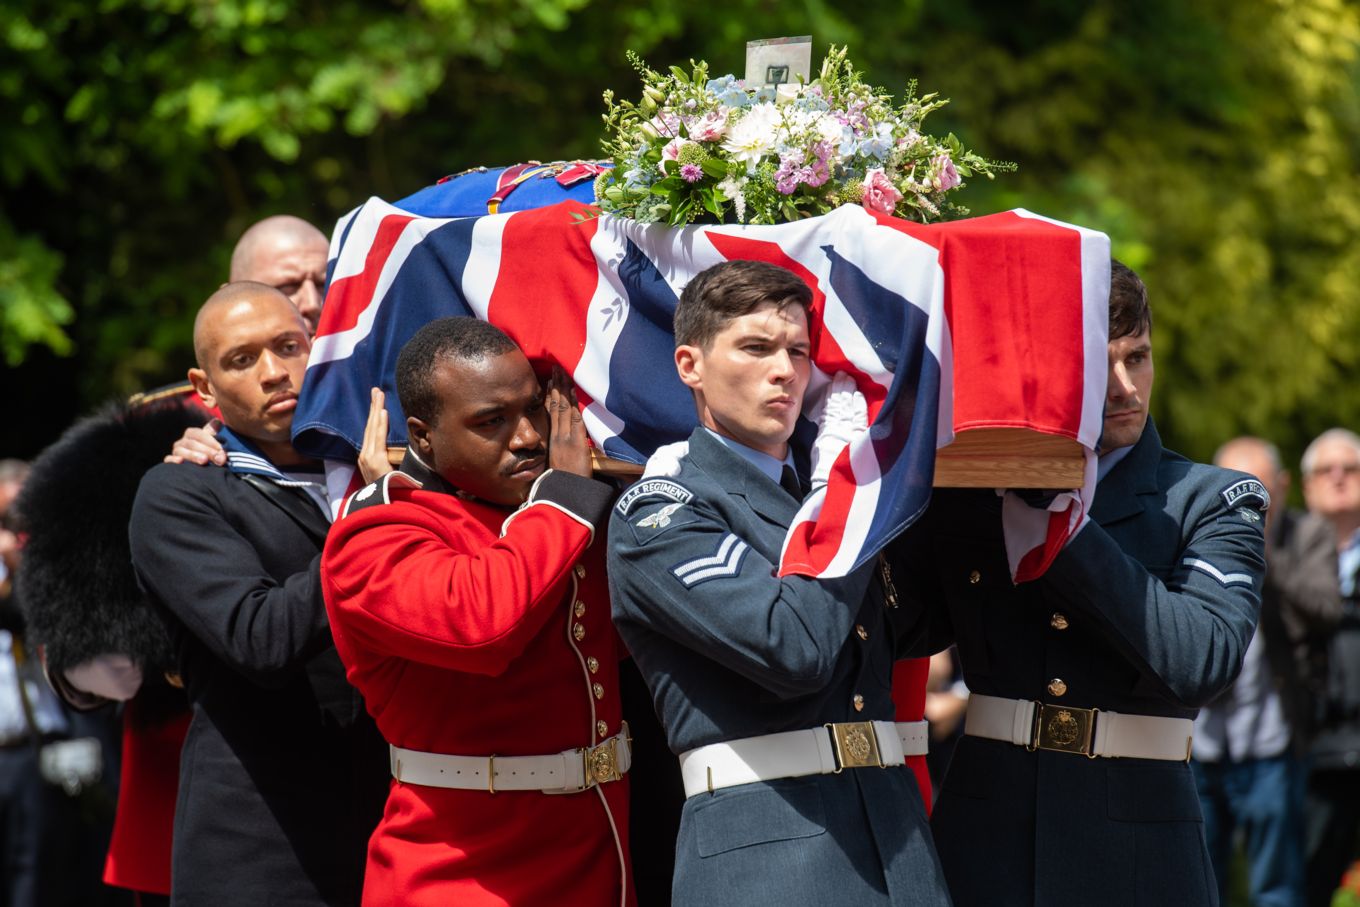 Personnel from all three services formed a bearer party to carry Dame Vera’s coffin into the funeral service